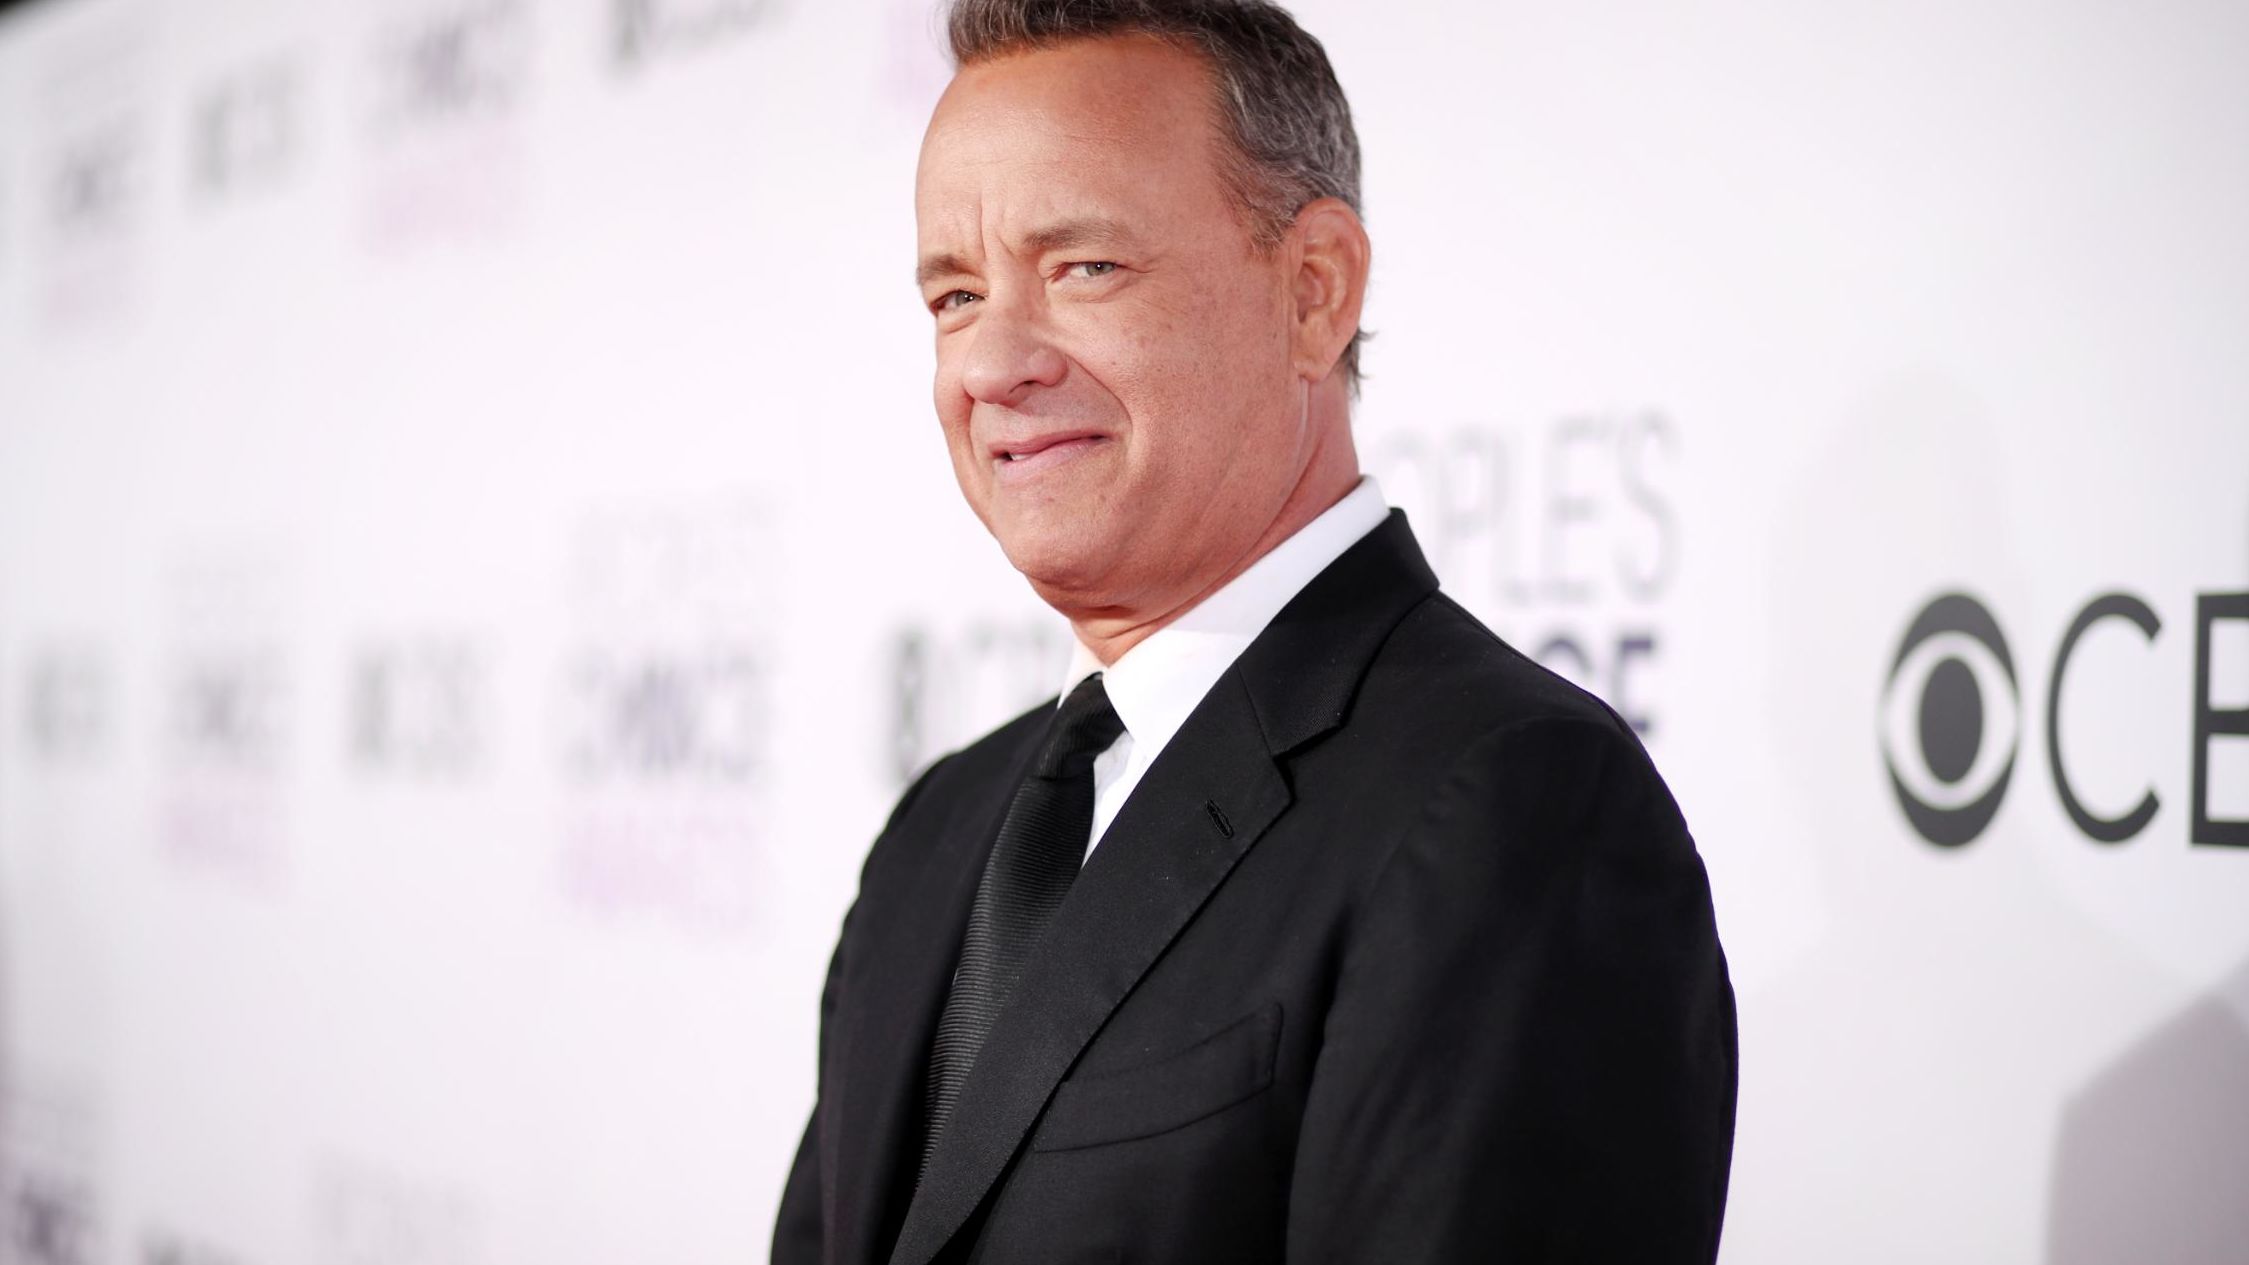 Hanks said projects "must portray the burden of racism" in the United States.